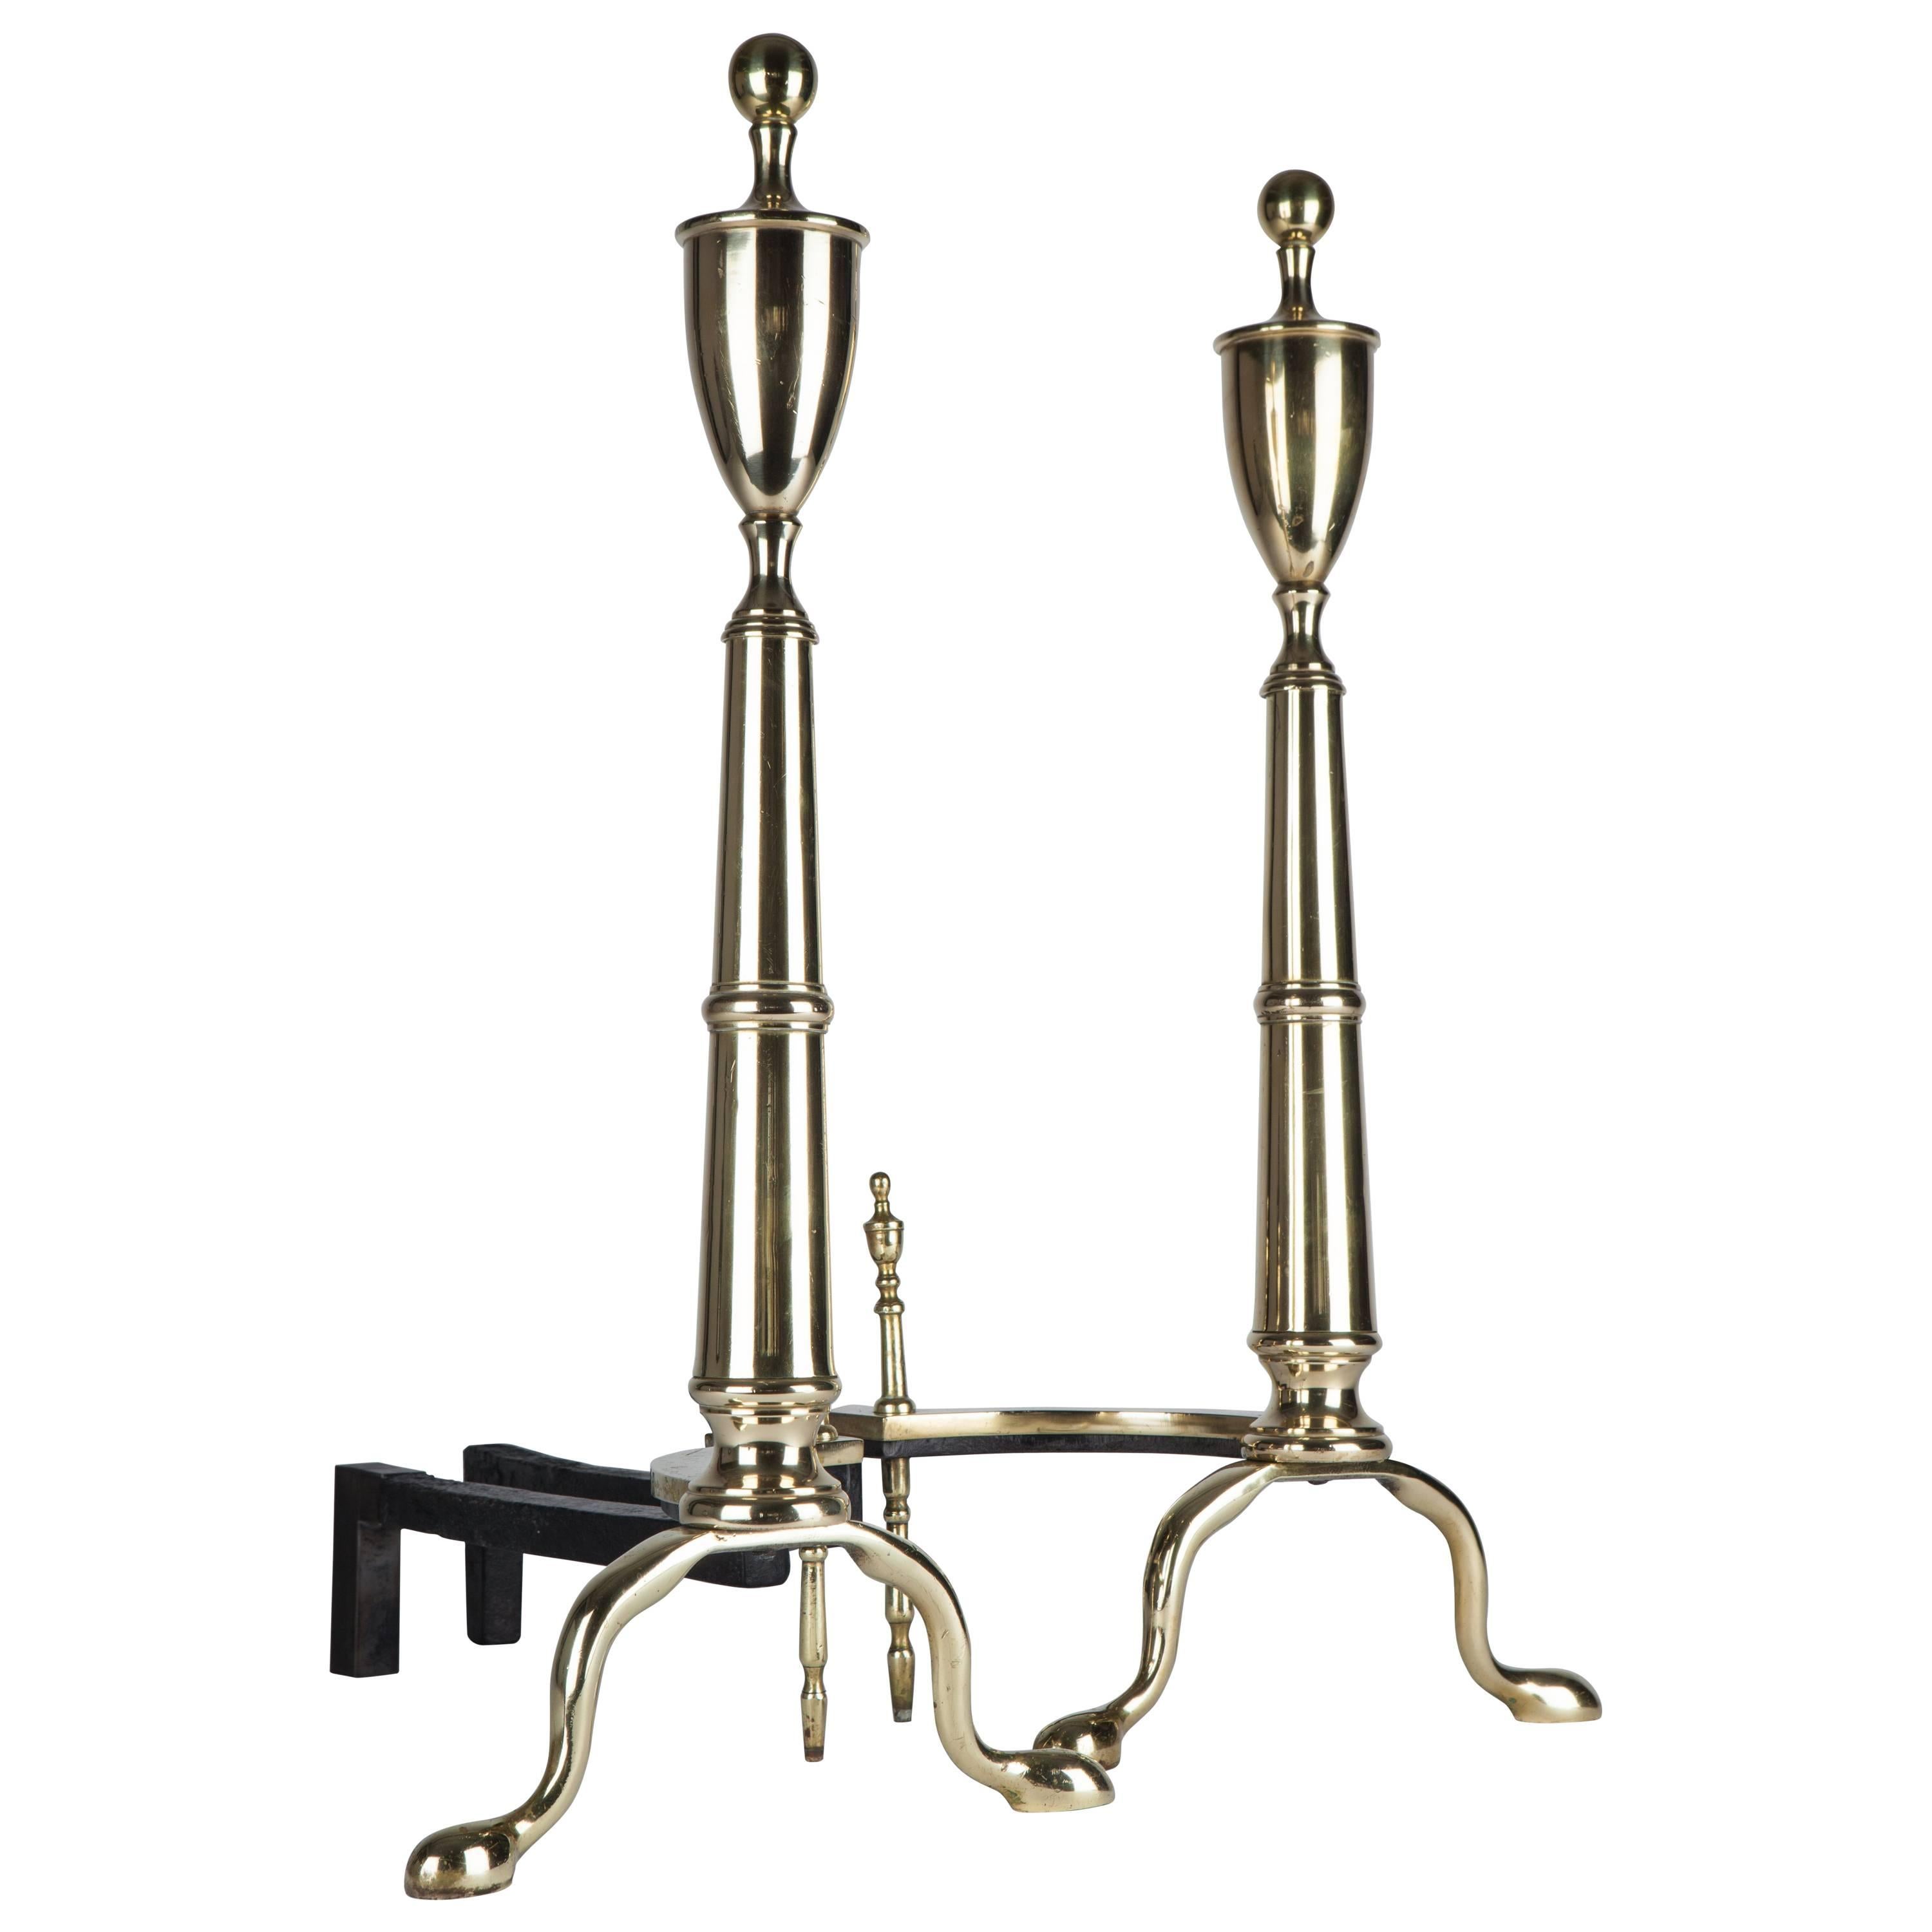 Brass Andirons with Urn Finials and Pad Feet, Circa 1920s For Sale